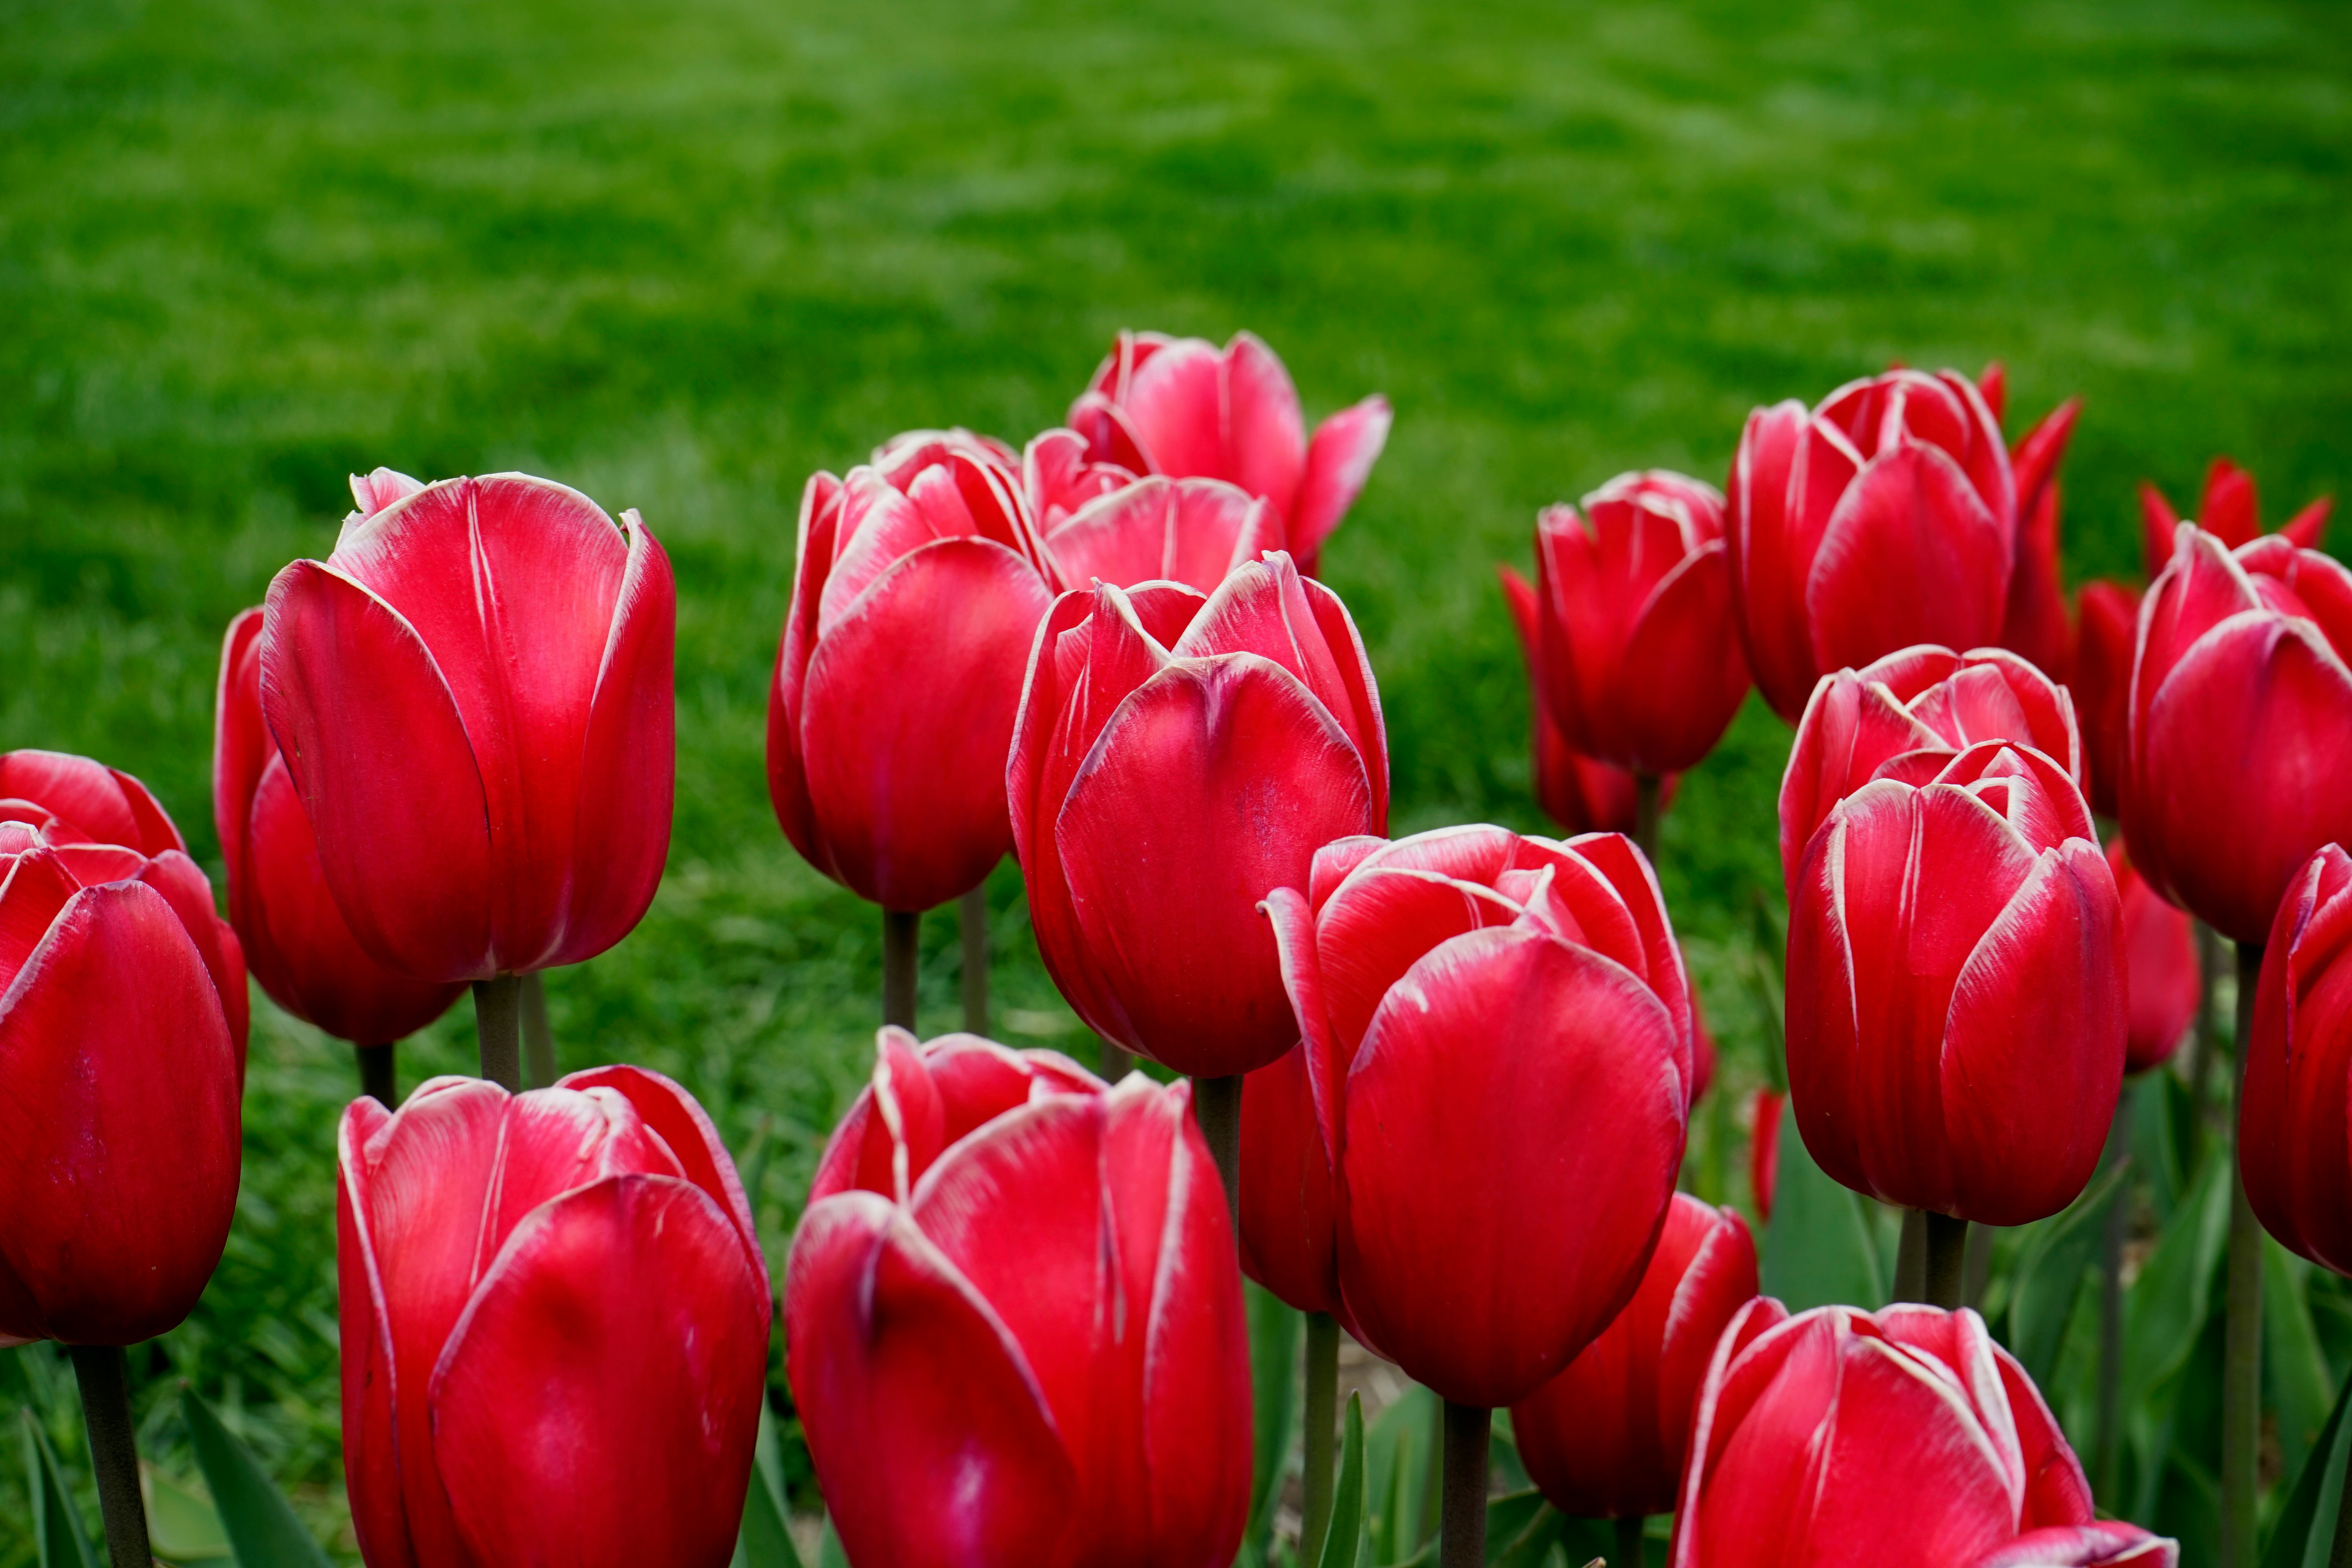 red tulips in green grass field during daytime